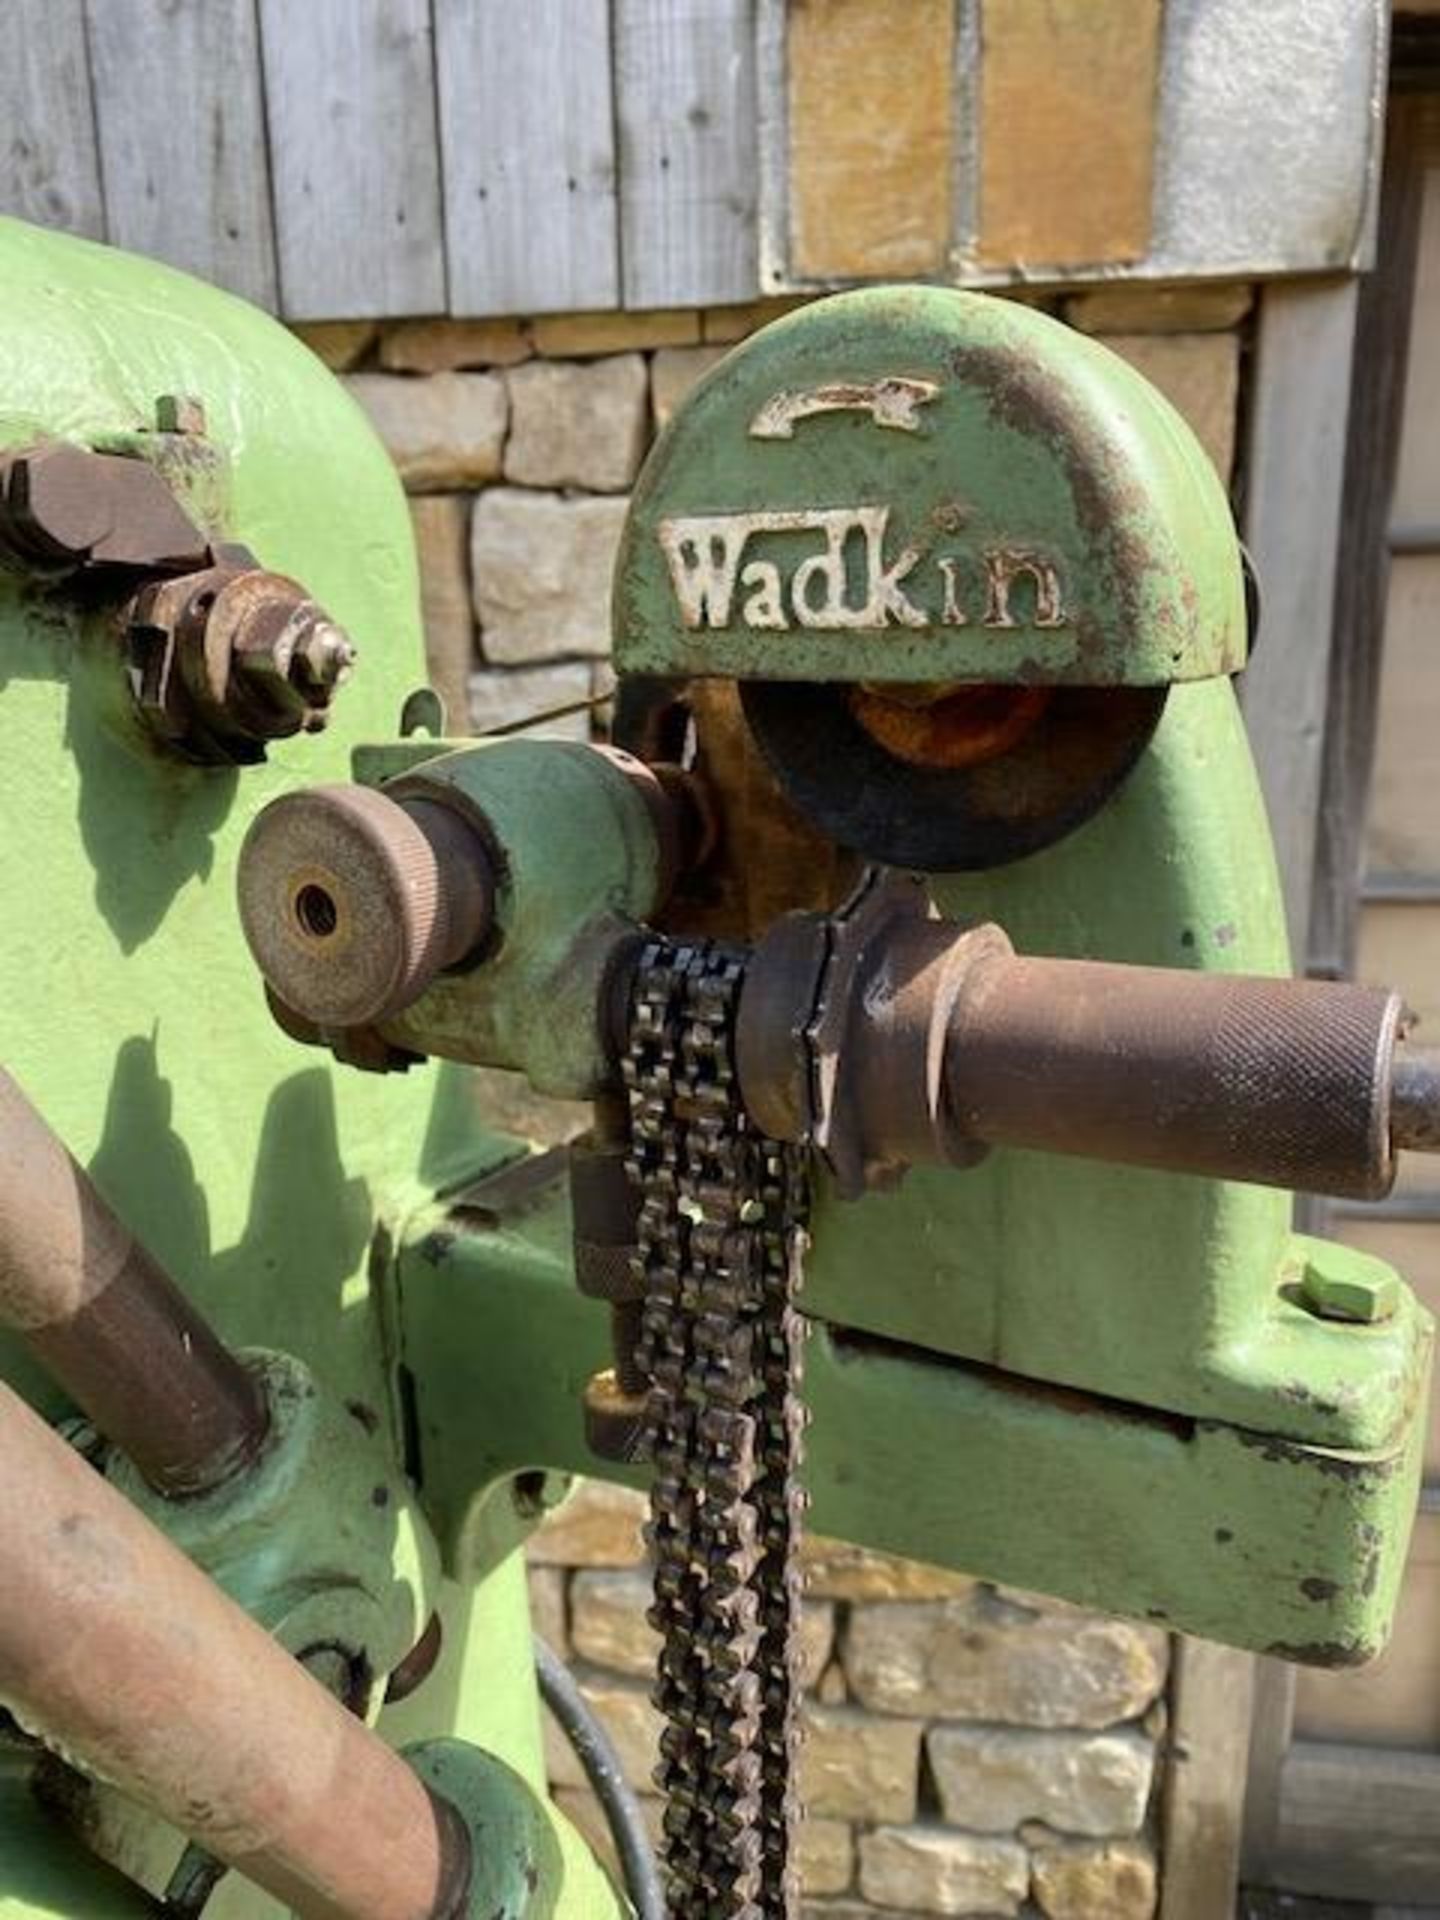 Wadkin MF Chain & Chisel Morticer, serial no. 102358, with grinding attachmentPlease read the - Bild 8 aus 9